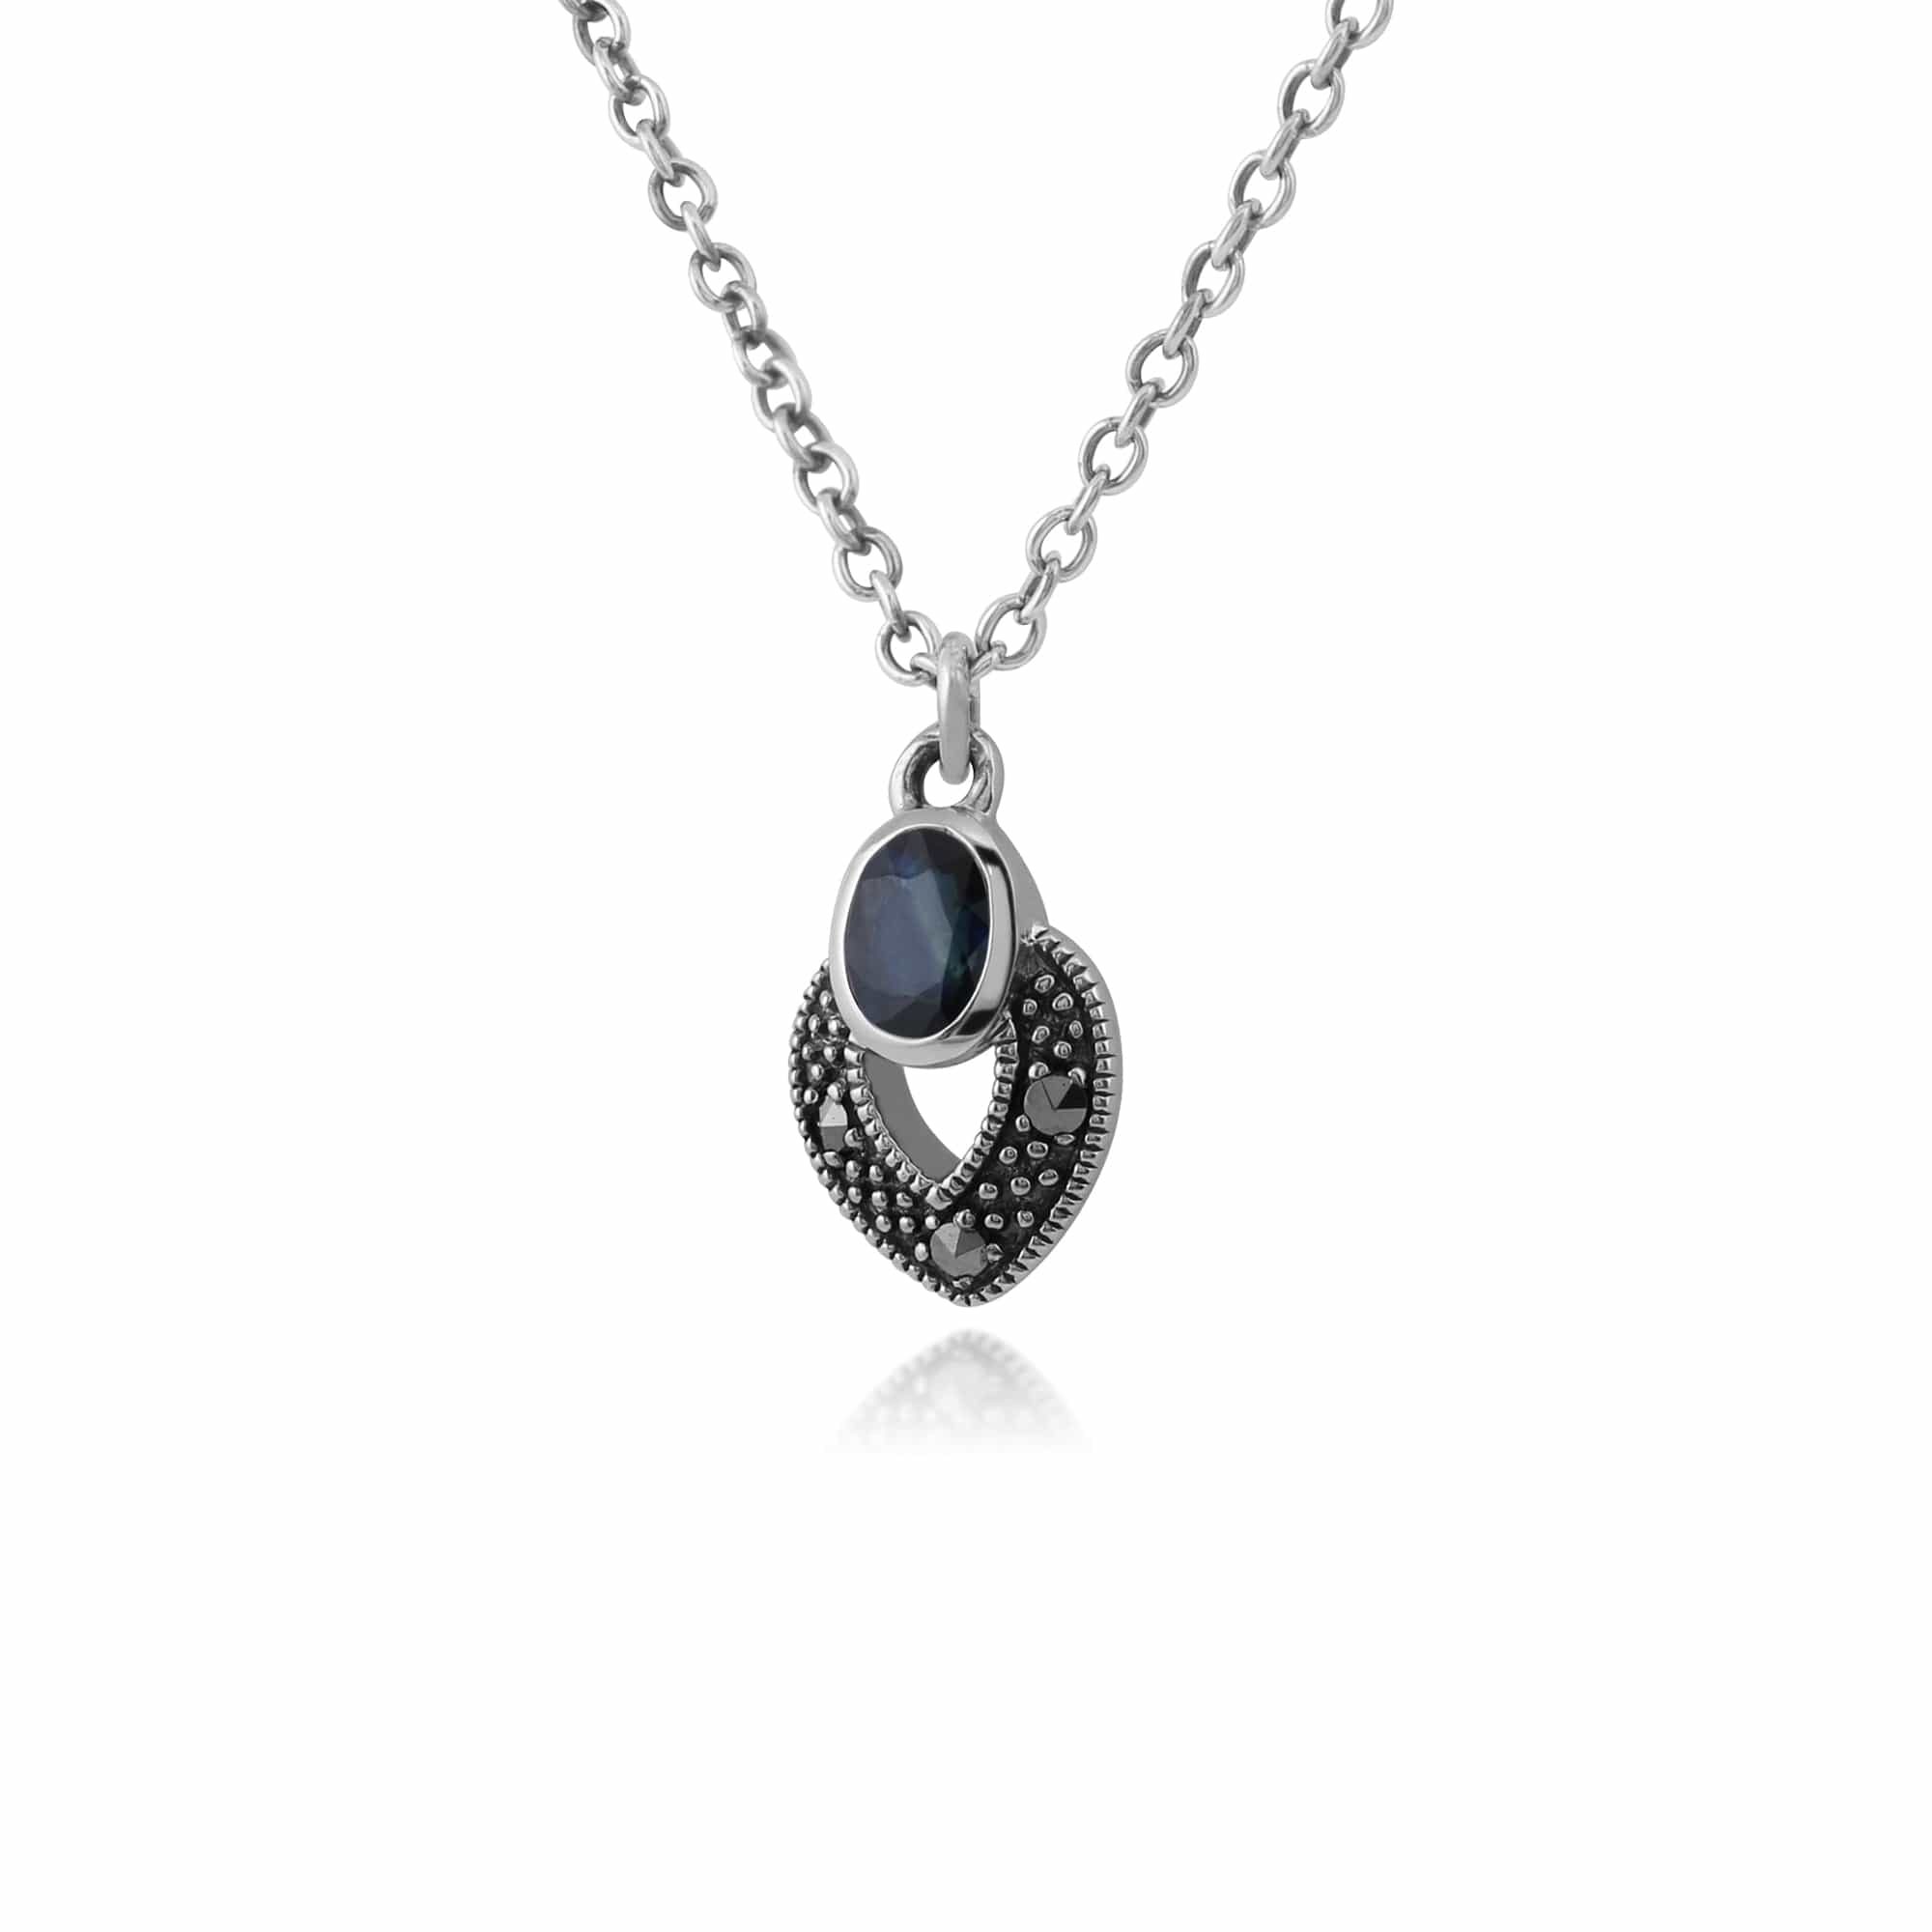 Art Deco Style Oval Sapphire & Marcasite Necklace in 925 Sterling Silver - Gemondo